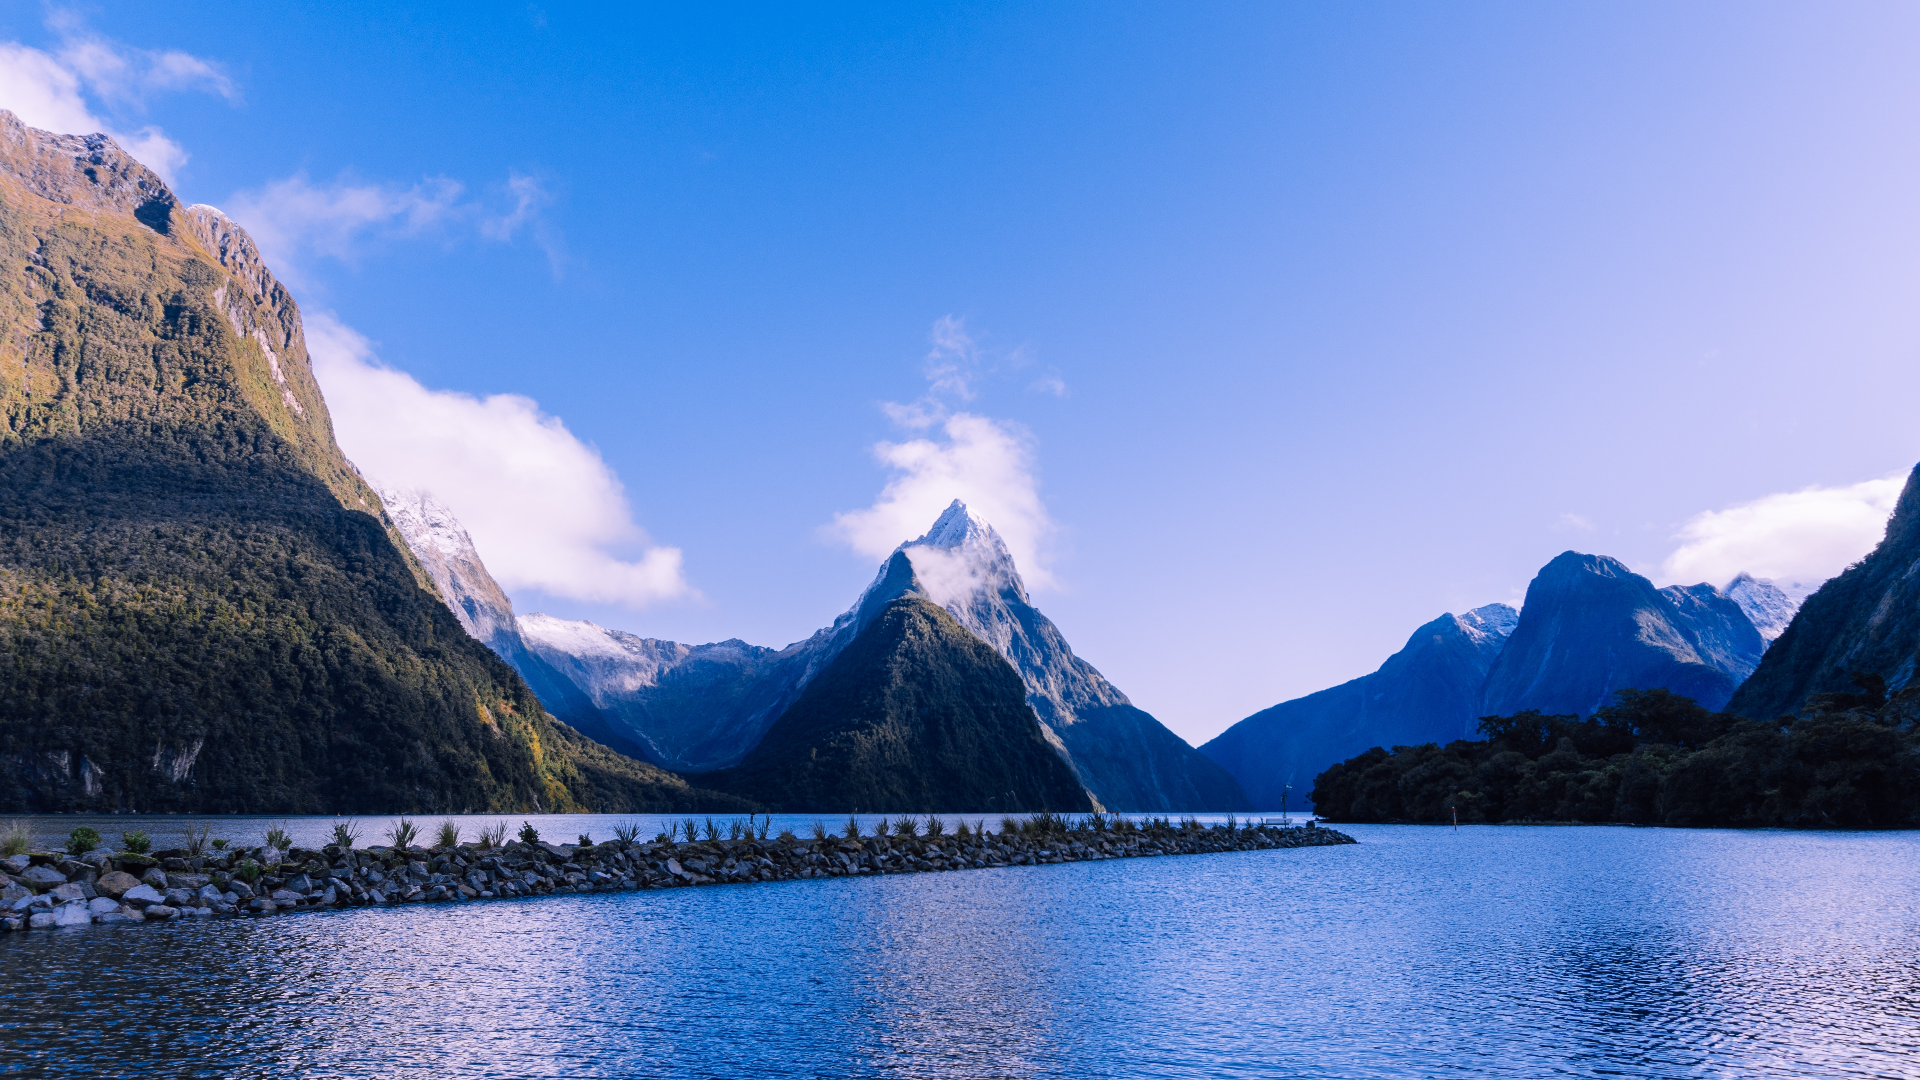 Nature Landscape Mountains Trees River Water Rocks Plants Clouds Sky Fiordland National Park Lake Mo 1920x1080